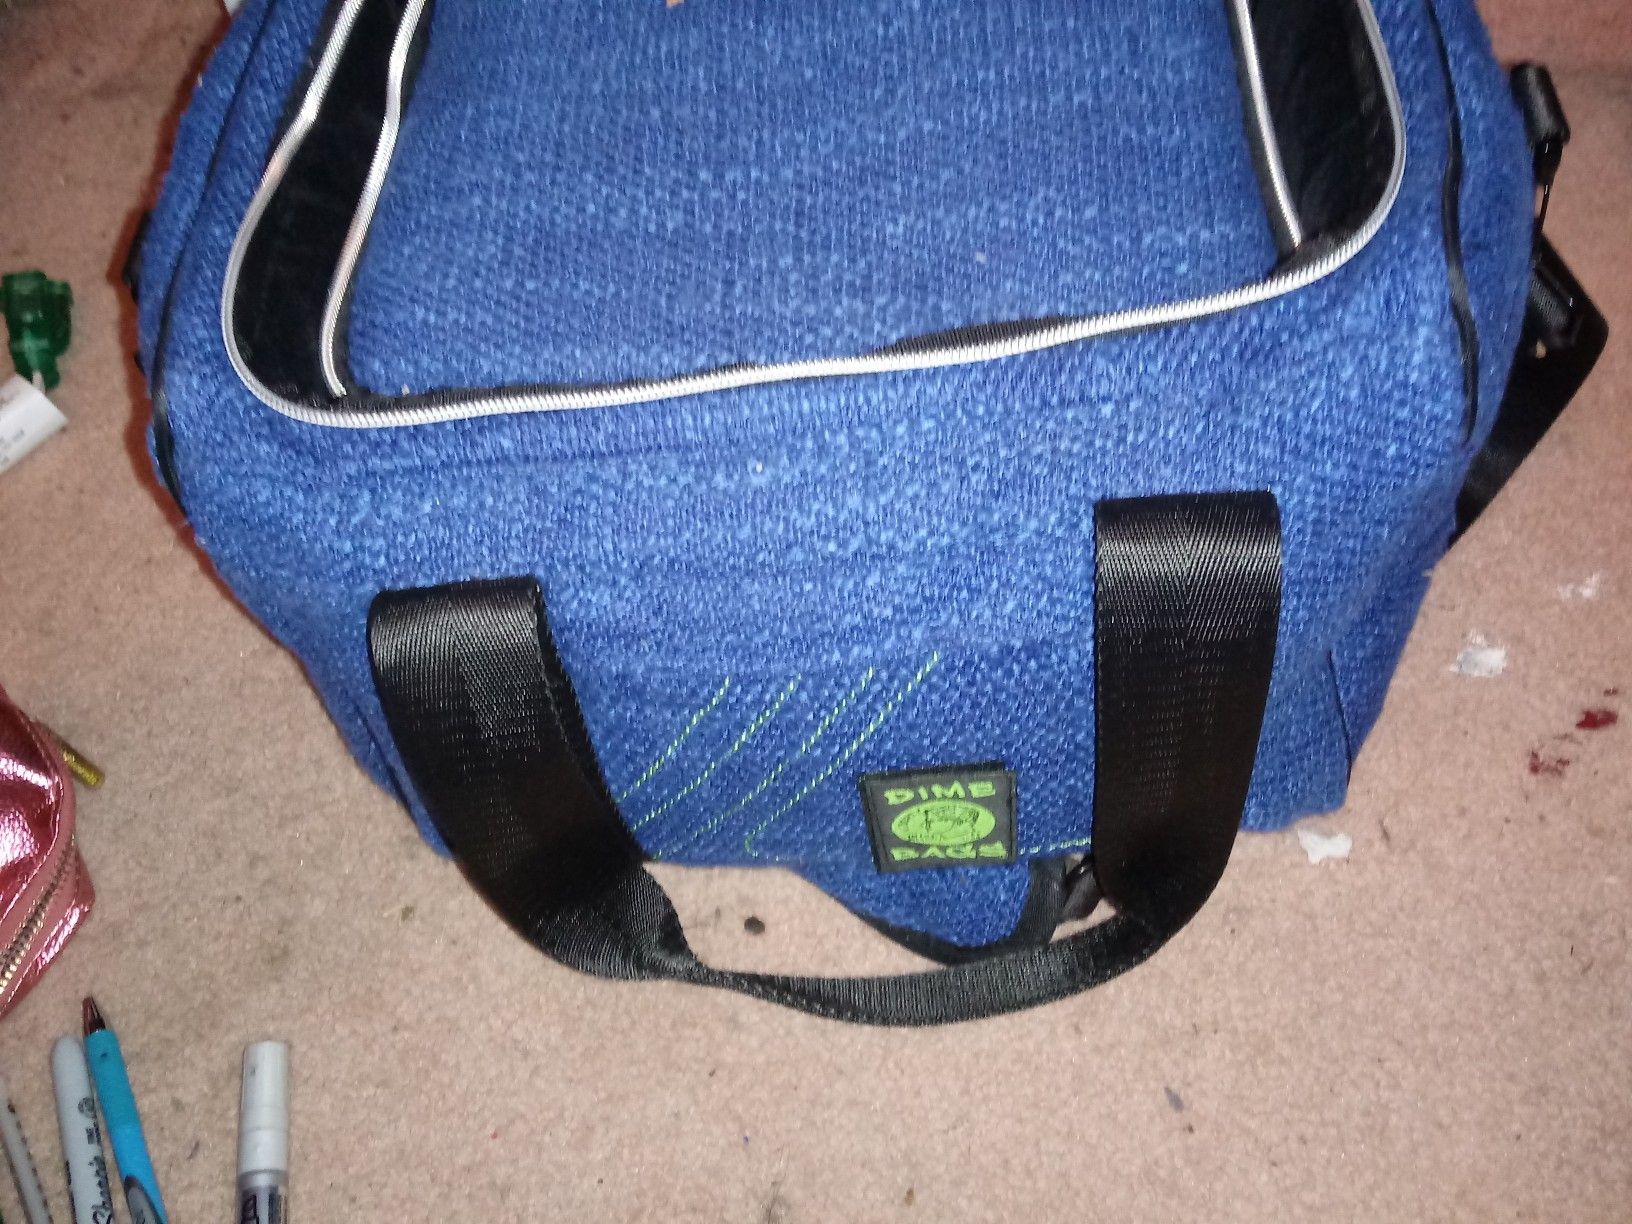 Dime Bag travel tote and dab station.